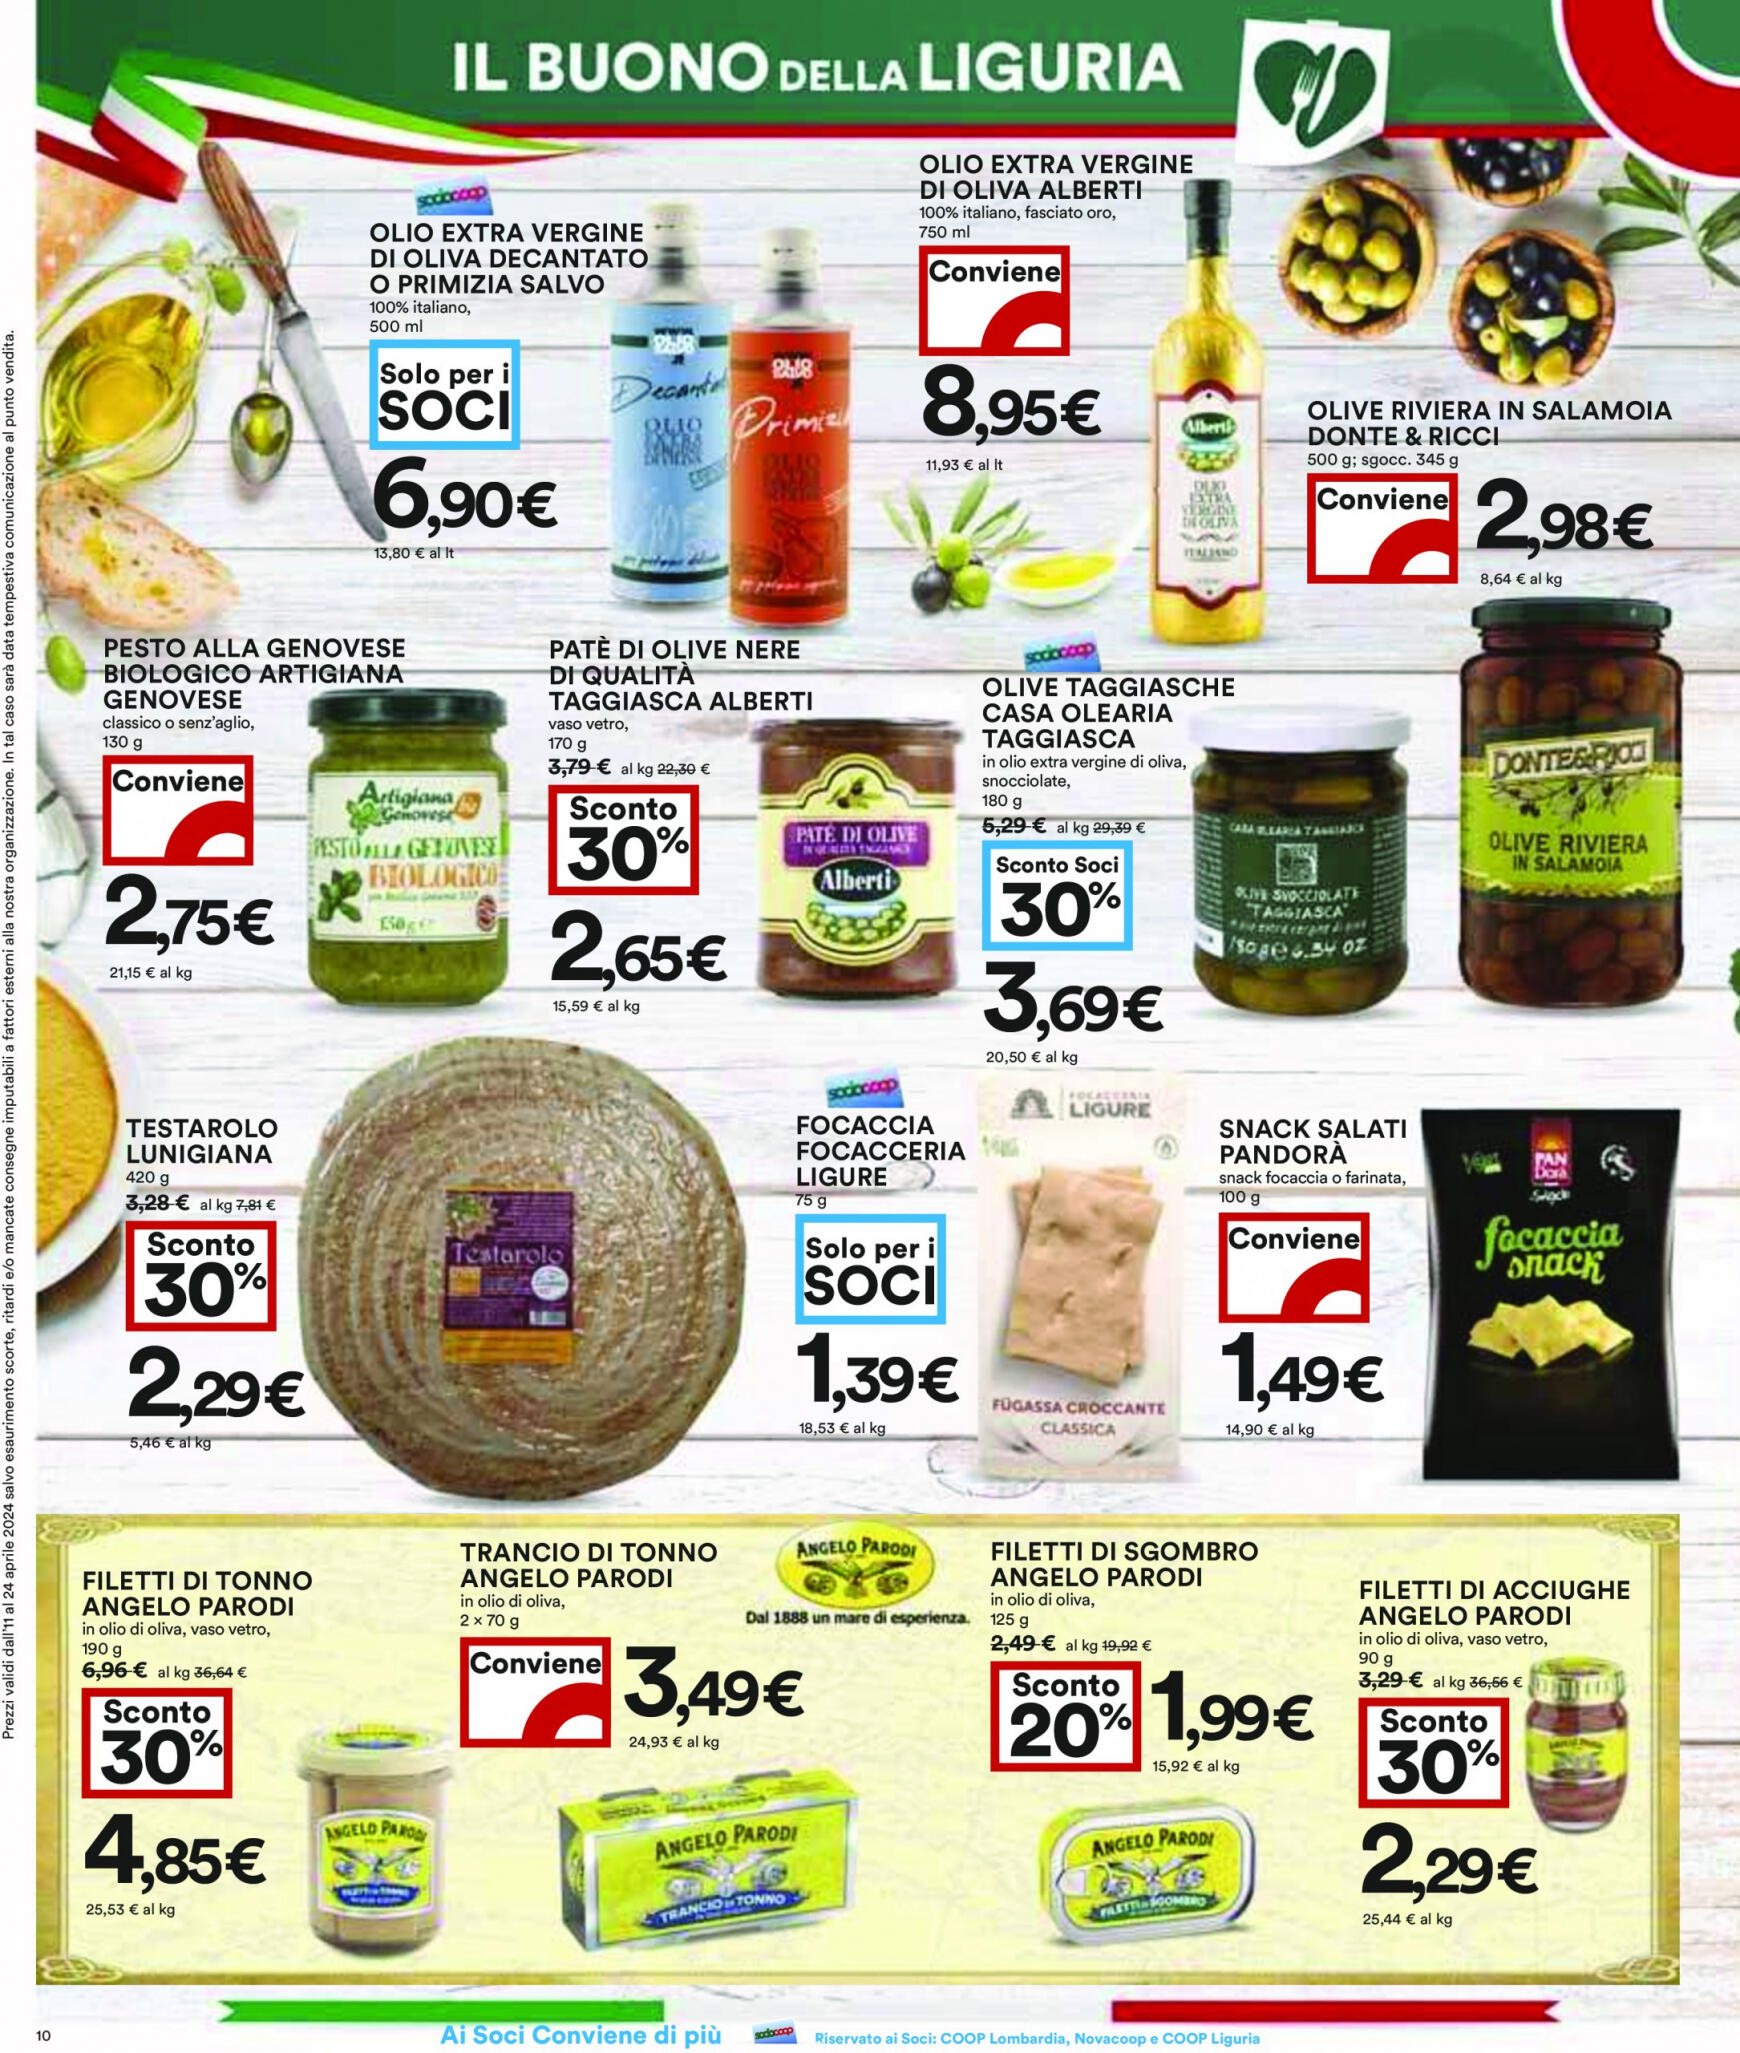 coop - Nuovo volantino Coop 11.04. - 24.04. - page: 10